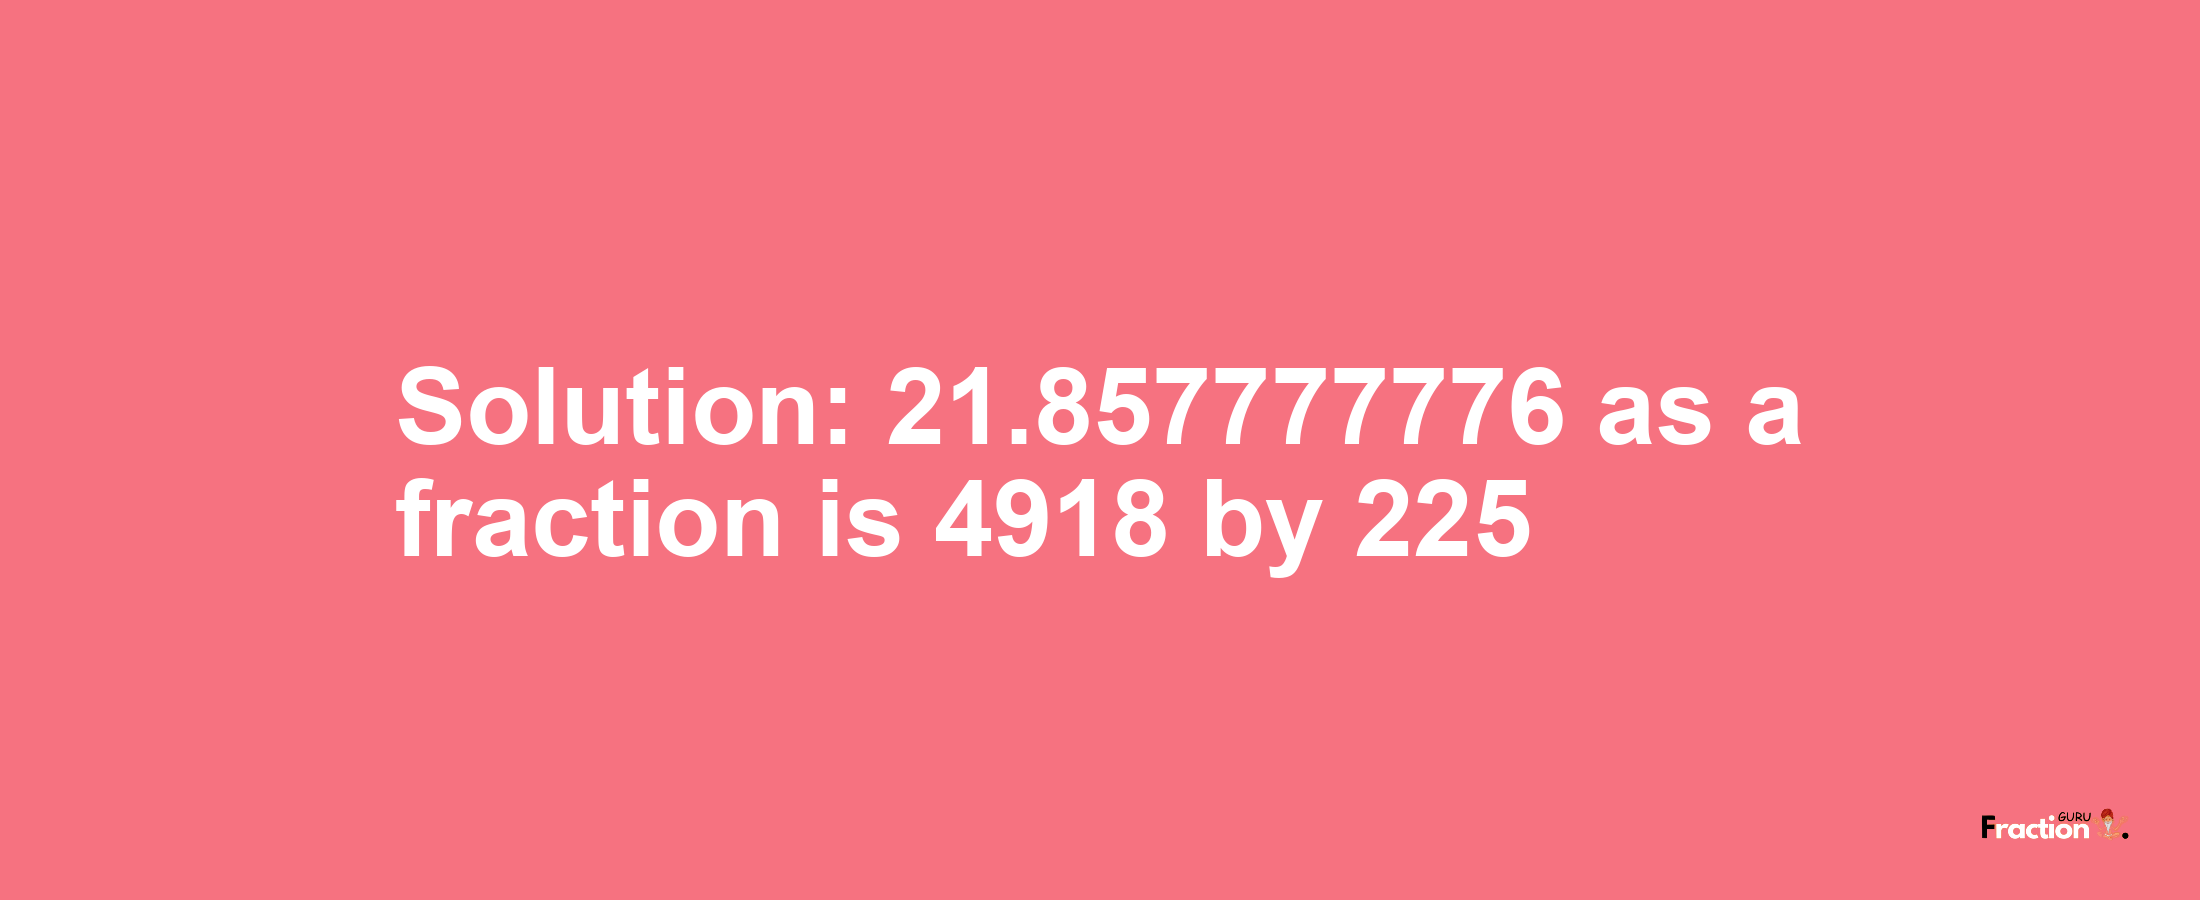 Solution:21.857777776 as a fraction is 4918/225